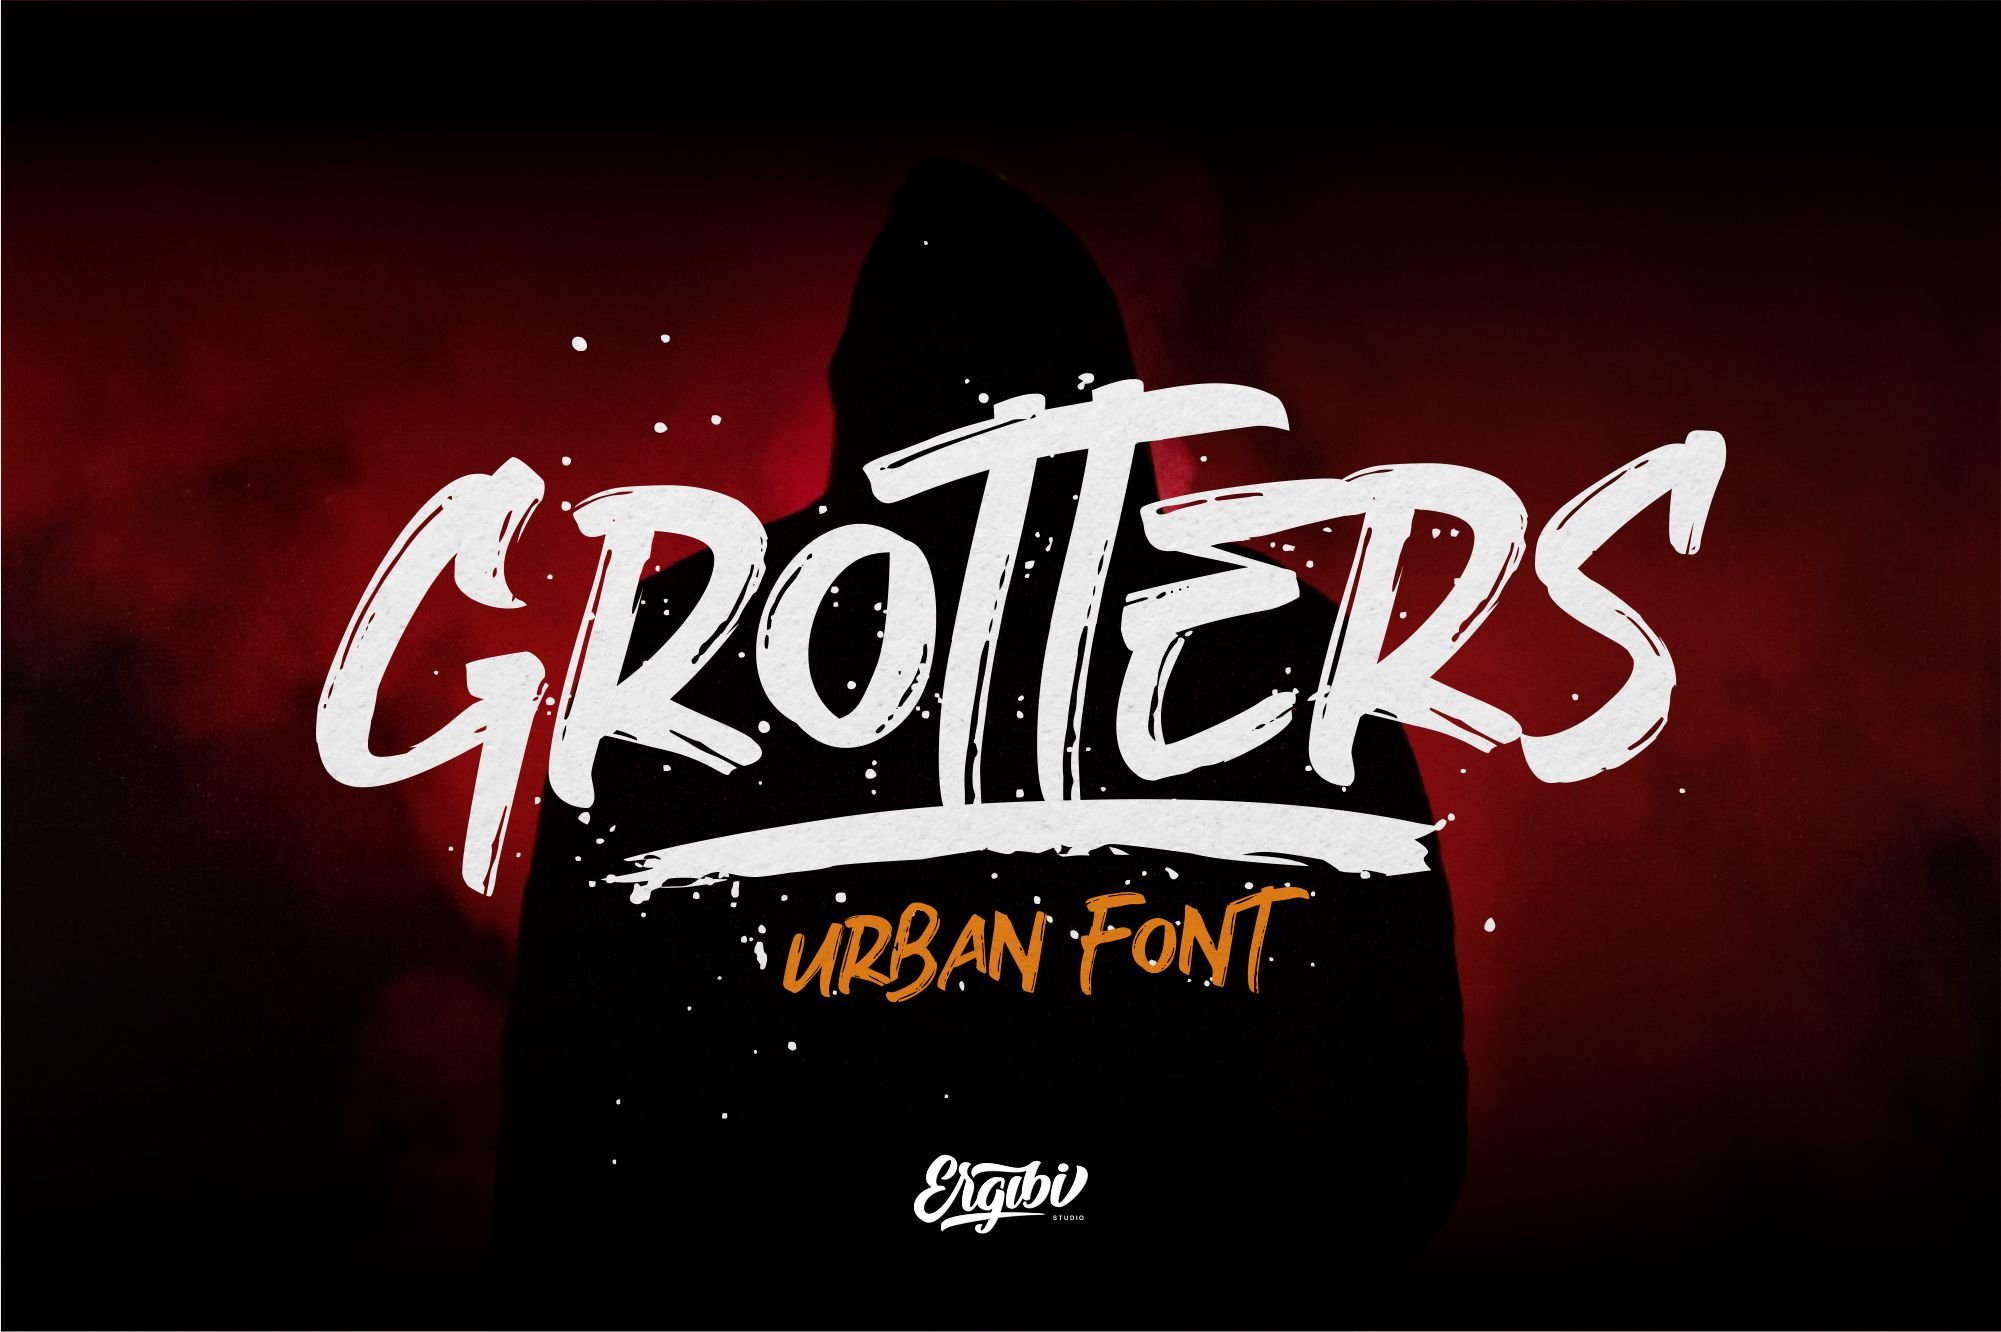 Grotters - Urban Font cover image.